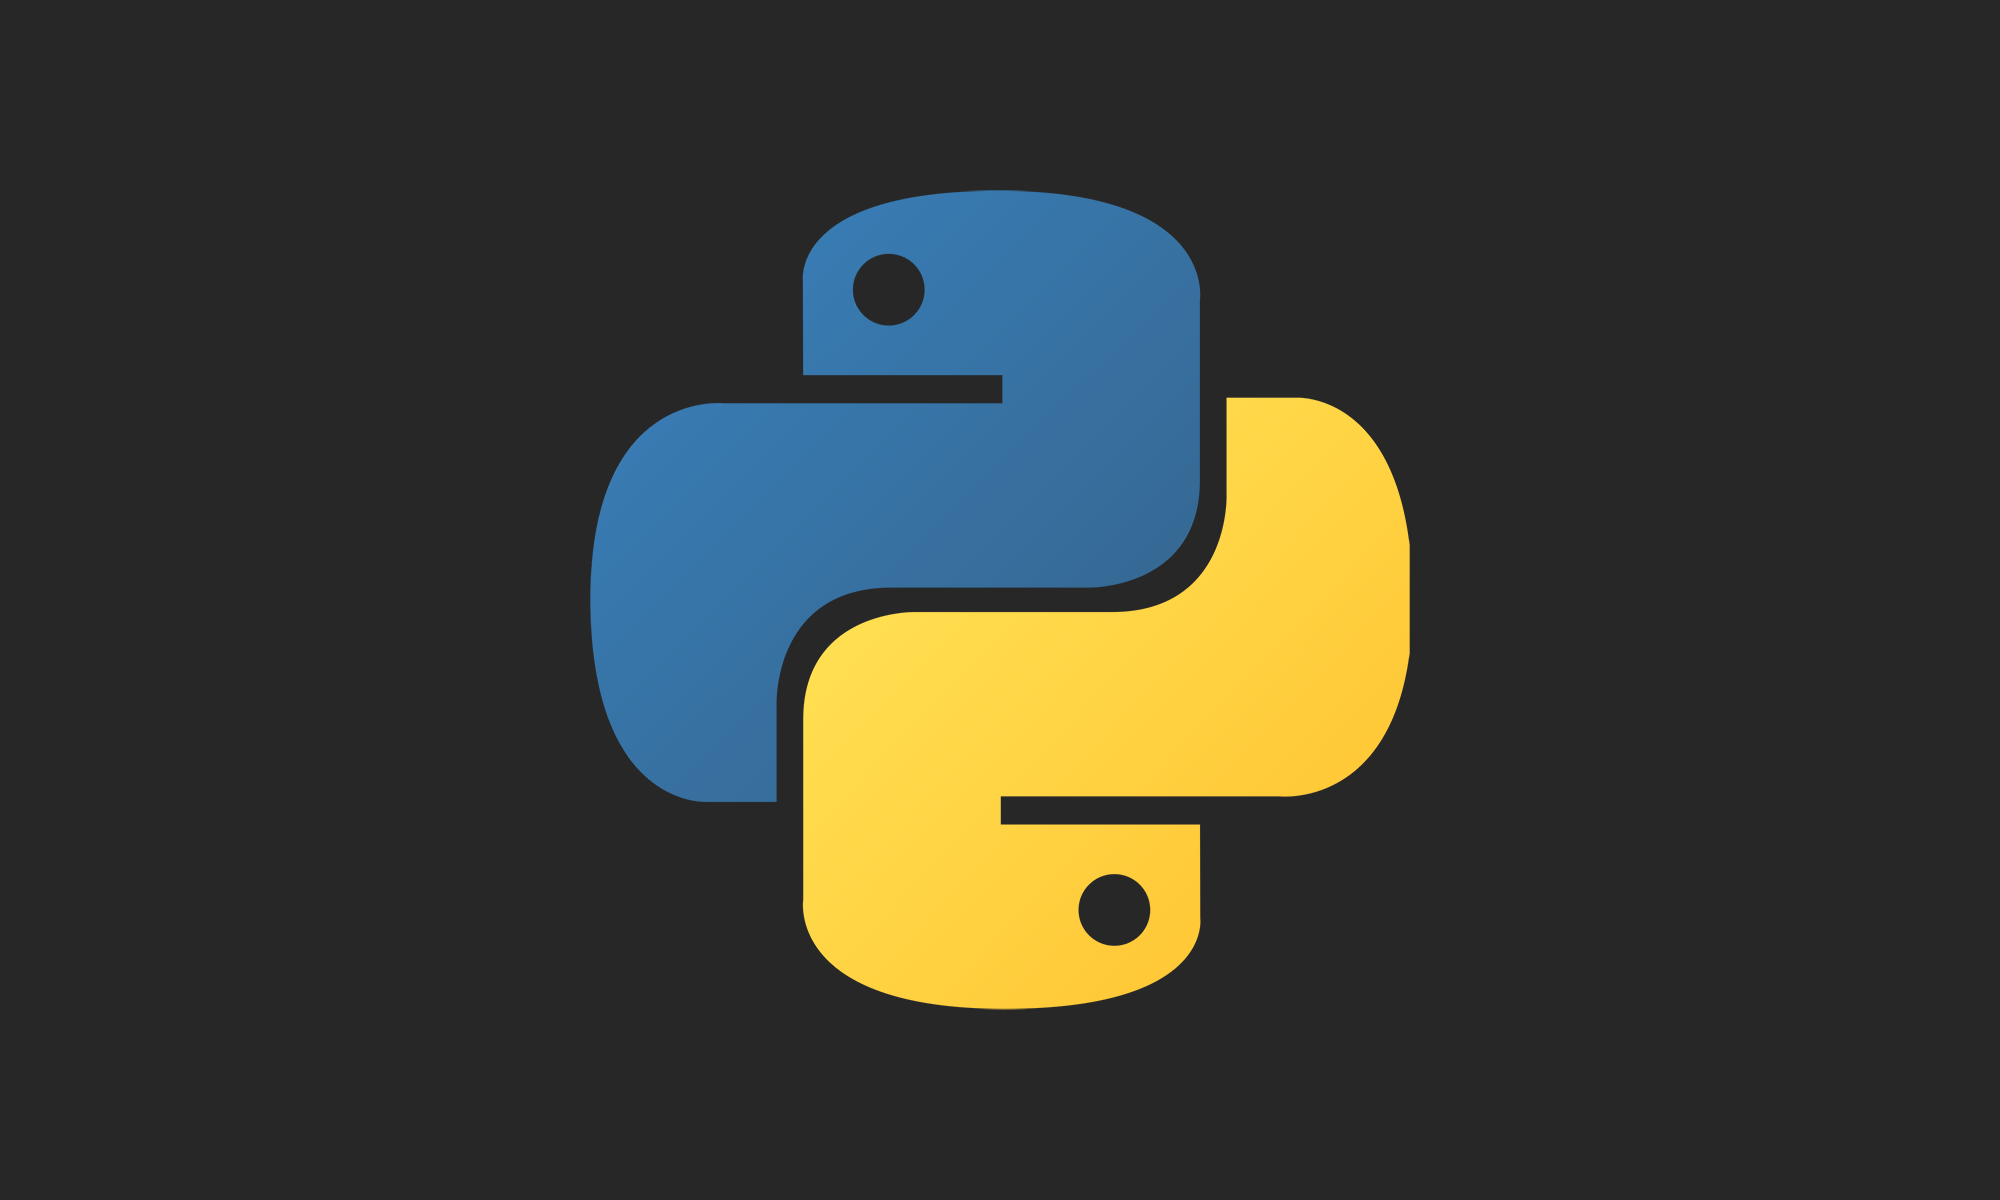 Python: how to download and extract a ZIP file